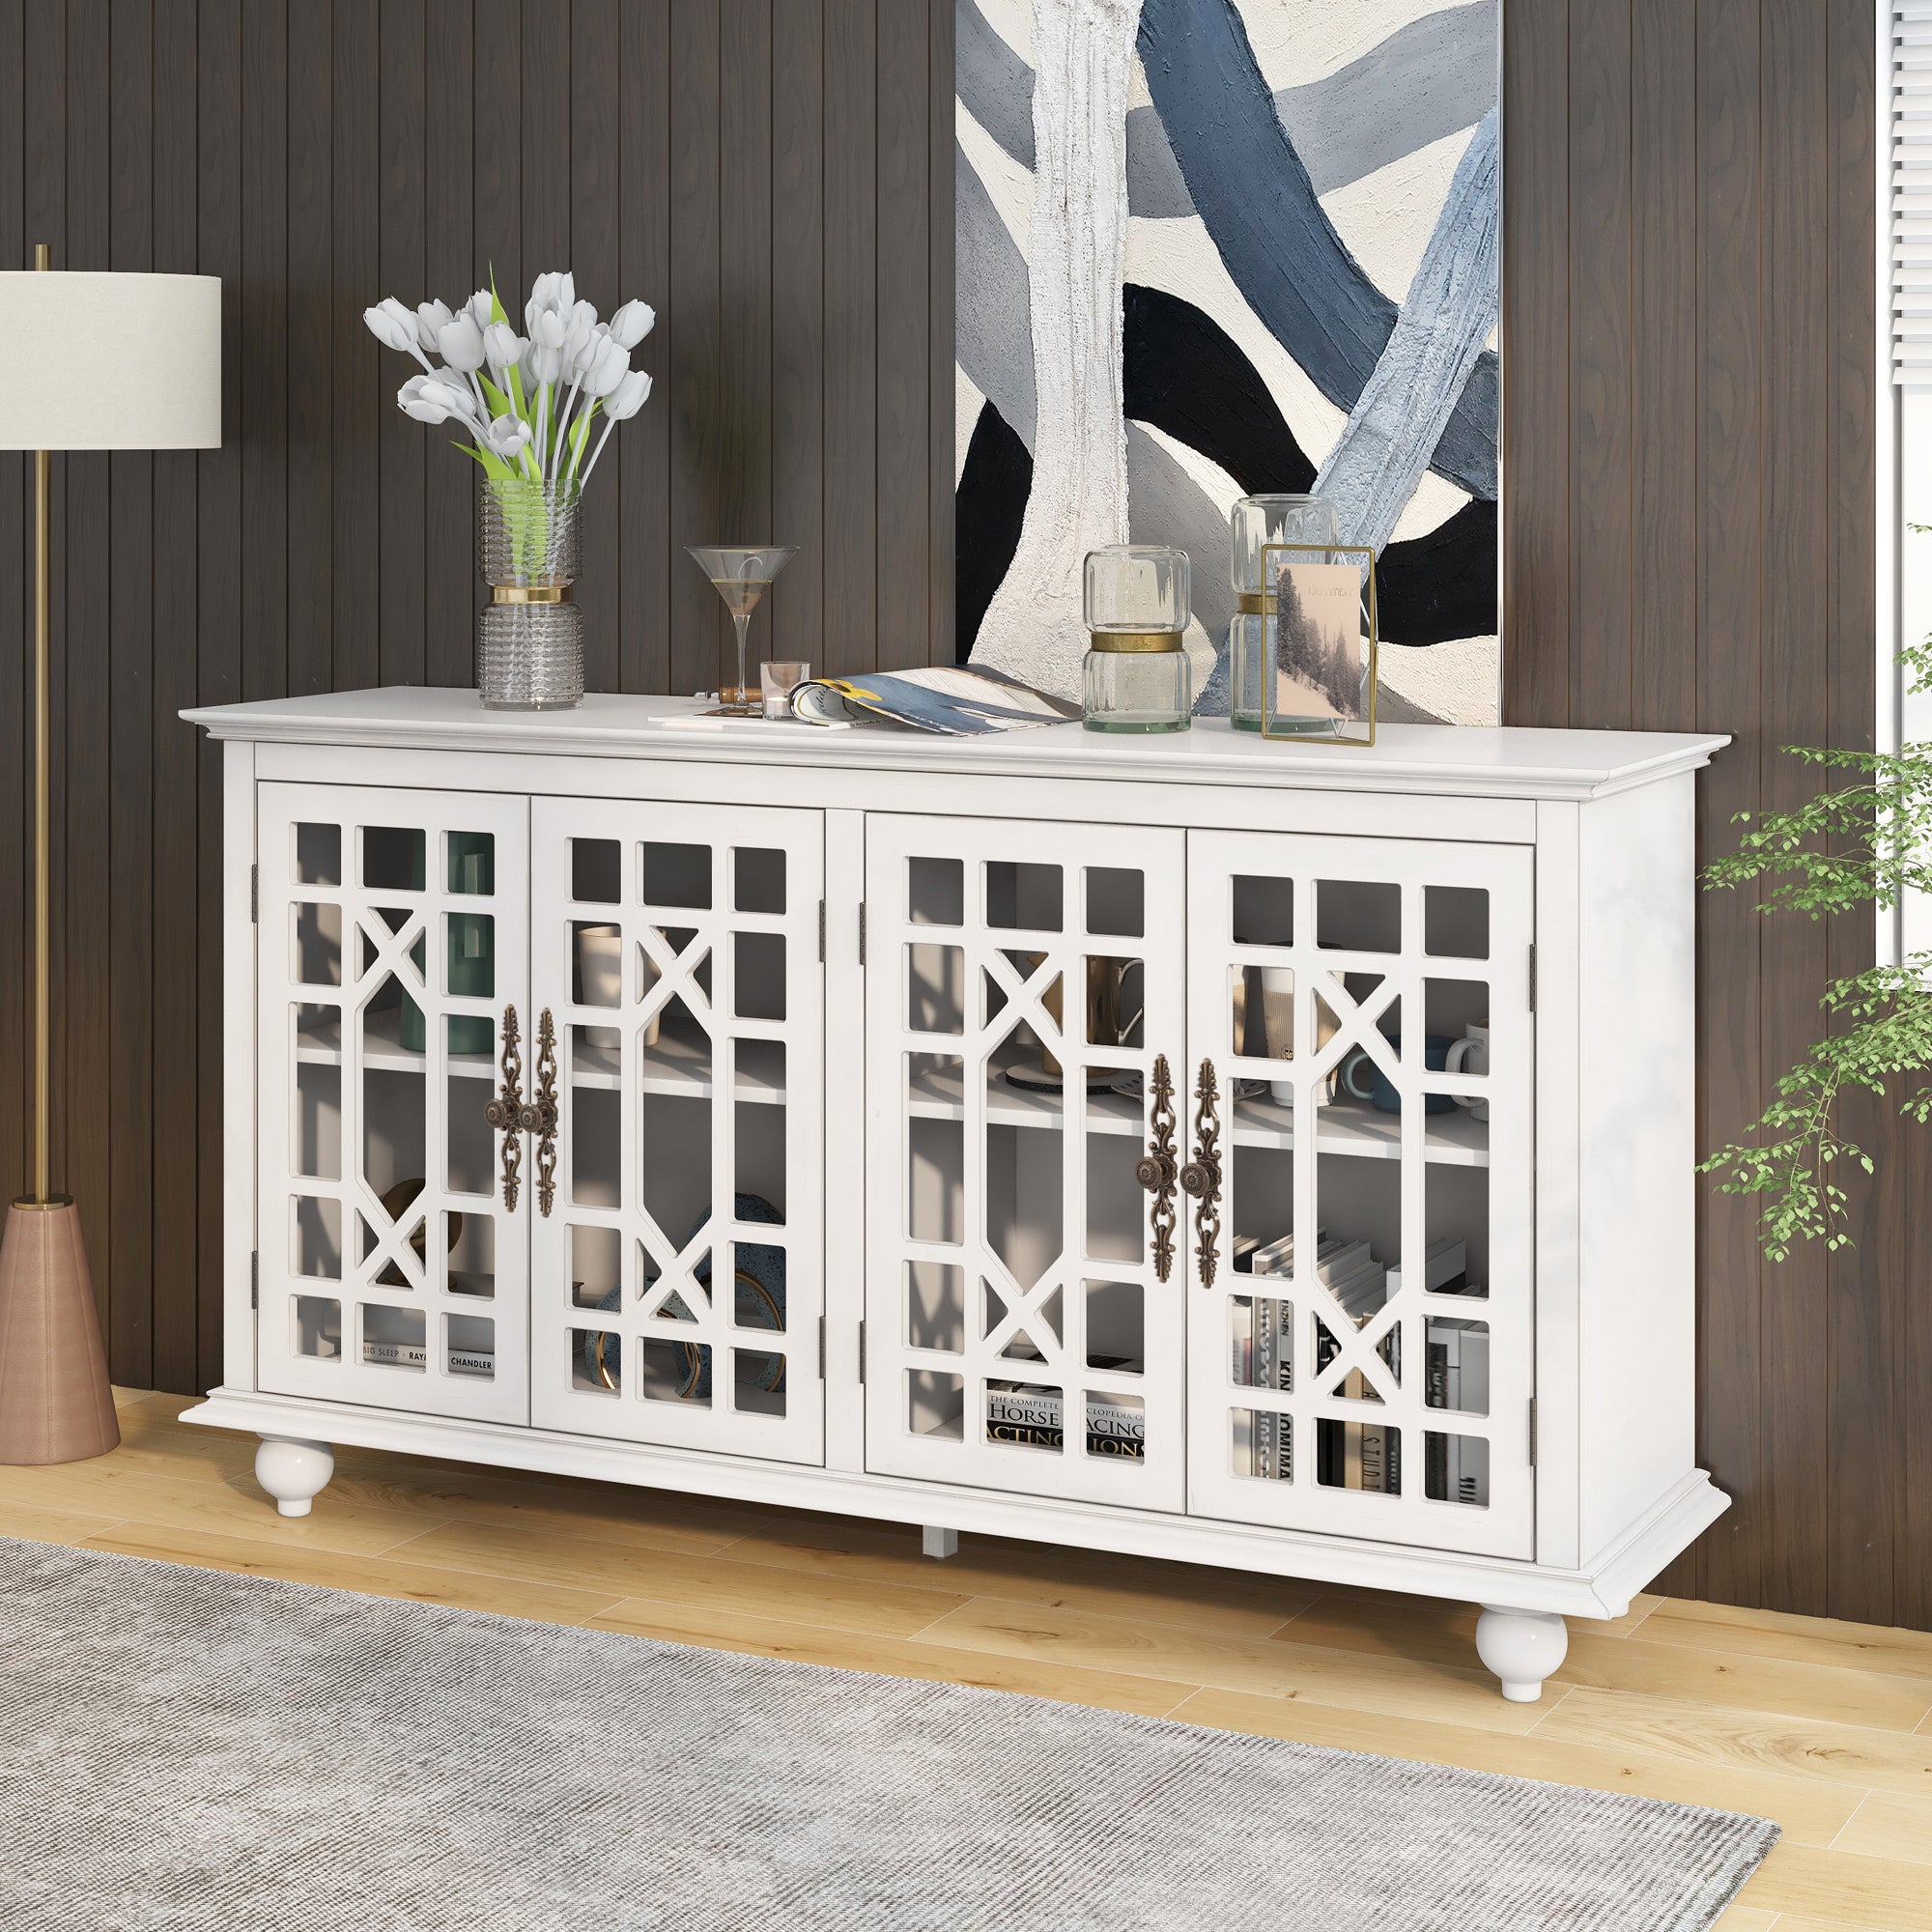 Sideboard with Adjustable Height Shelves, Metal antique white-mdf